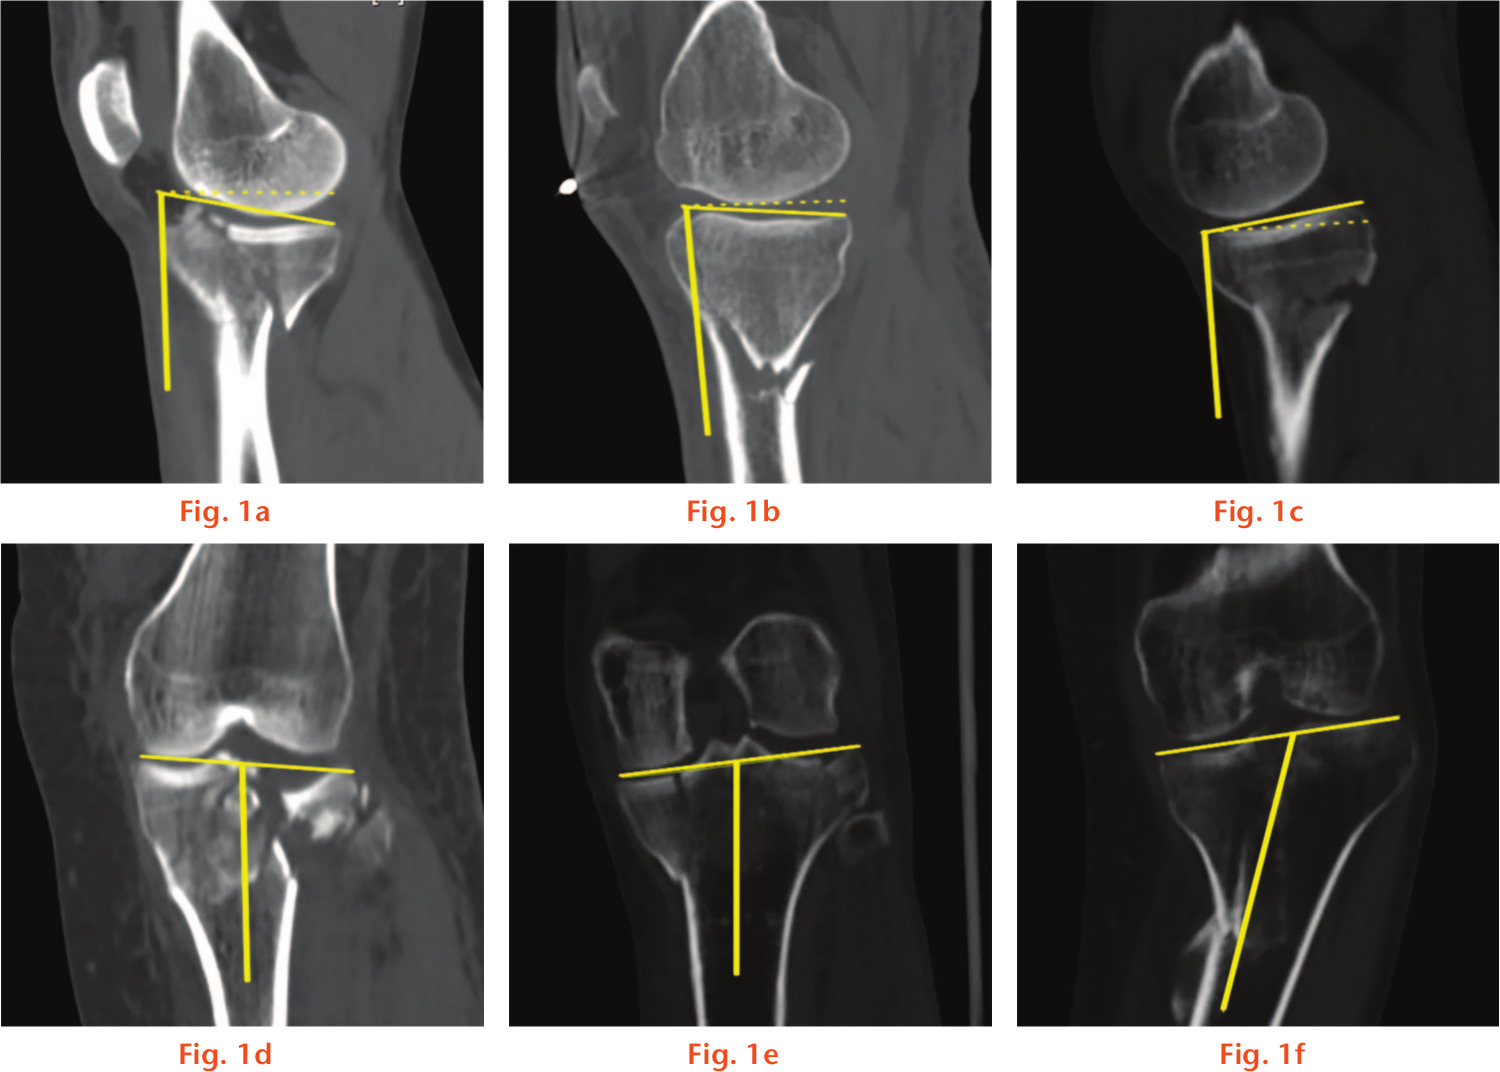 Fig. 1 
            Parameters in CT reconstruction images for injury mechanism. a) to c): Posterior tibial slope angle (PTSA), defined as the angle created by the tibial plateau and the long axis of the tibia in the sagittal plane. a) The increased PTSA indicates a flexion mode of initial position of knee joint; b) the normal or unchanged PTSA indicates extension injury pattern; c) the decreased PTSA (or retroversion) means the injured knee in hyperextension pattern. d) to f): tibial plateau angle (TPA) defined as the angle created by the medial angle of tibial plateau surface and the long axis of the tibia shaft in the coronal plane. d) The increased TPA indicates a valgus force; e) the normal or unchanged TPA indicates axial force; f) the decreased TPA means a varus force.
          